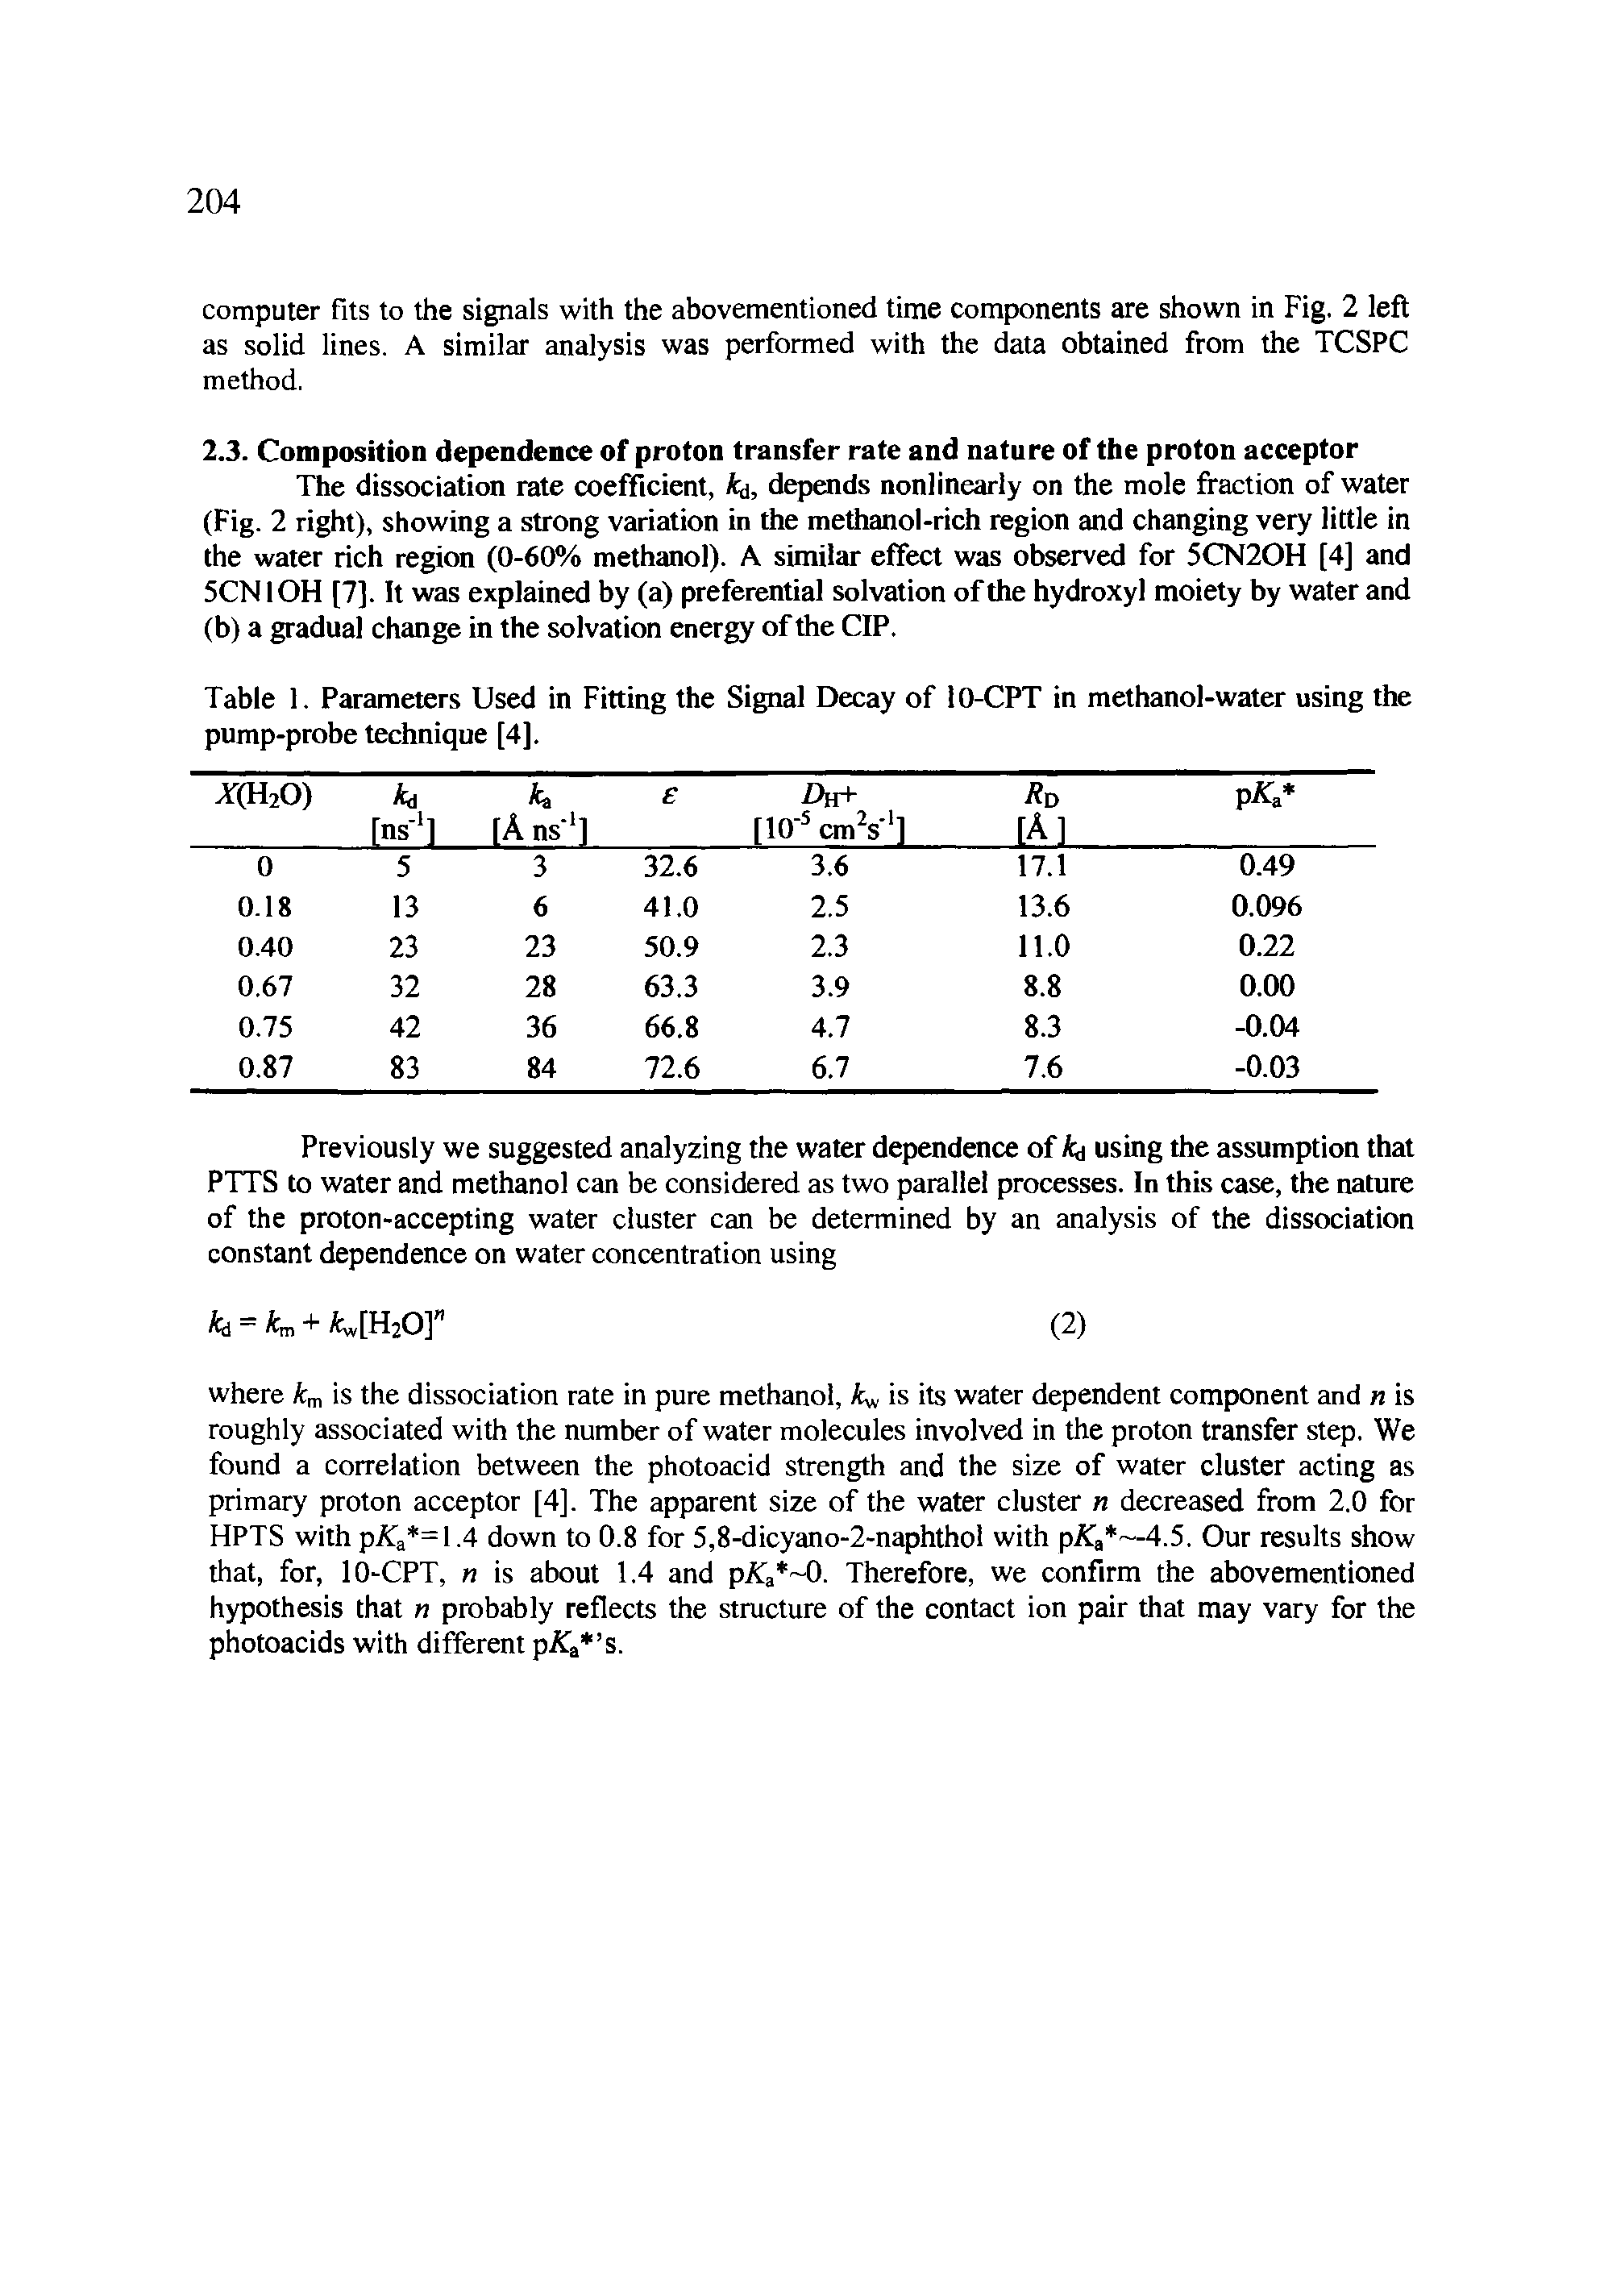 Table 1. Parameters Used in Fitting the Signal Decay of 10-CPT in methanol-water using the pump-probe technique [4],...